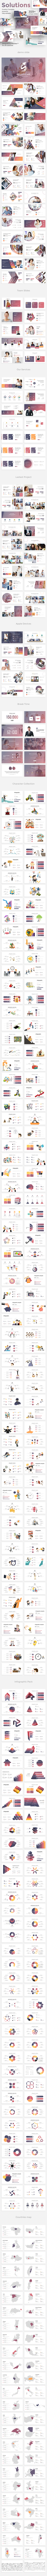 Solutions Fully Animated Pitch Deck Powerpoint Template